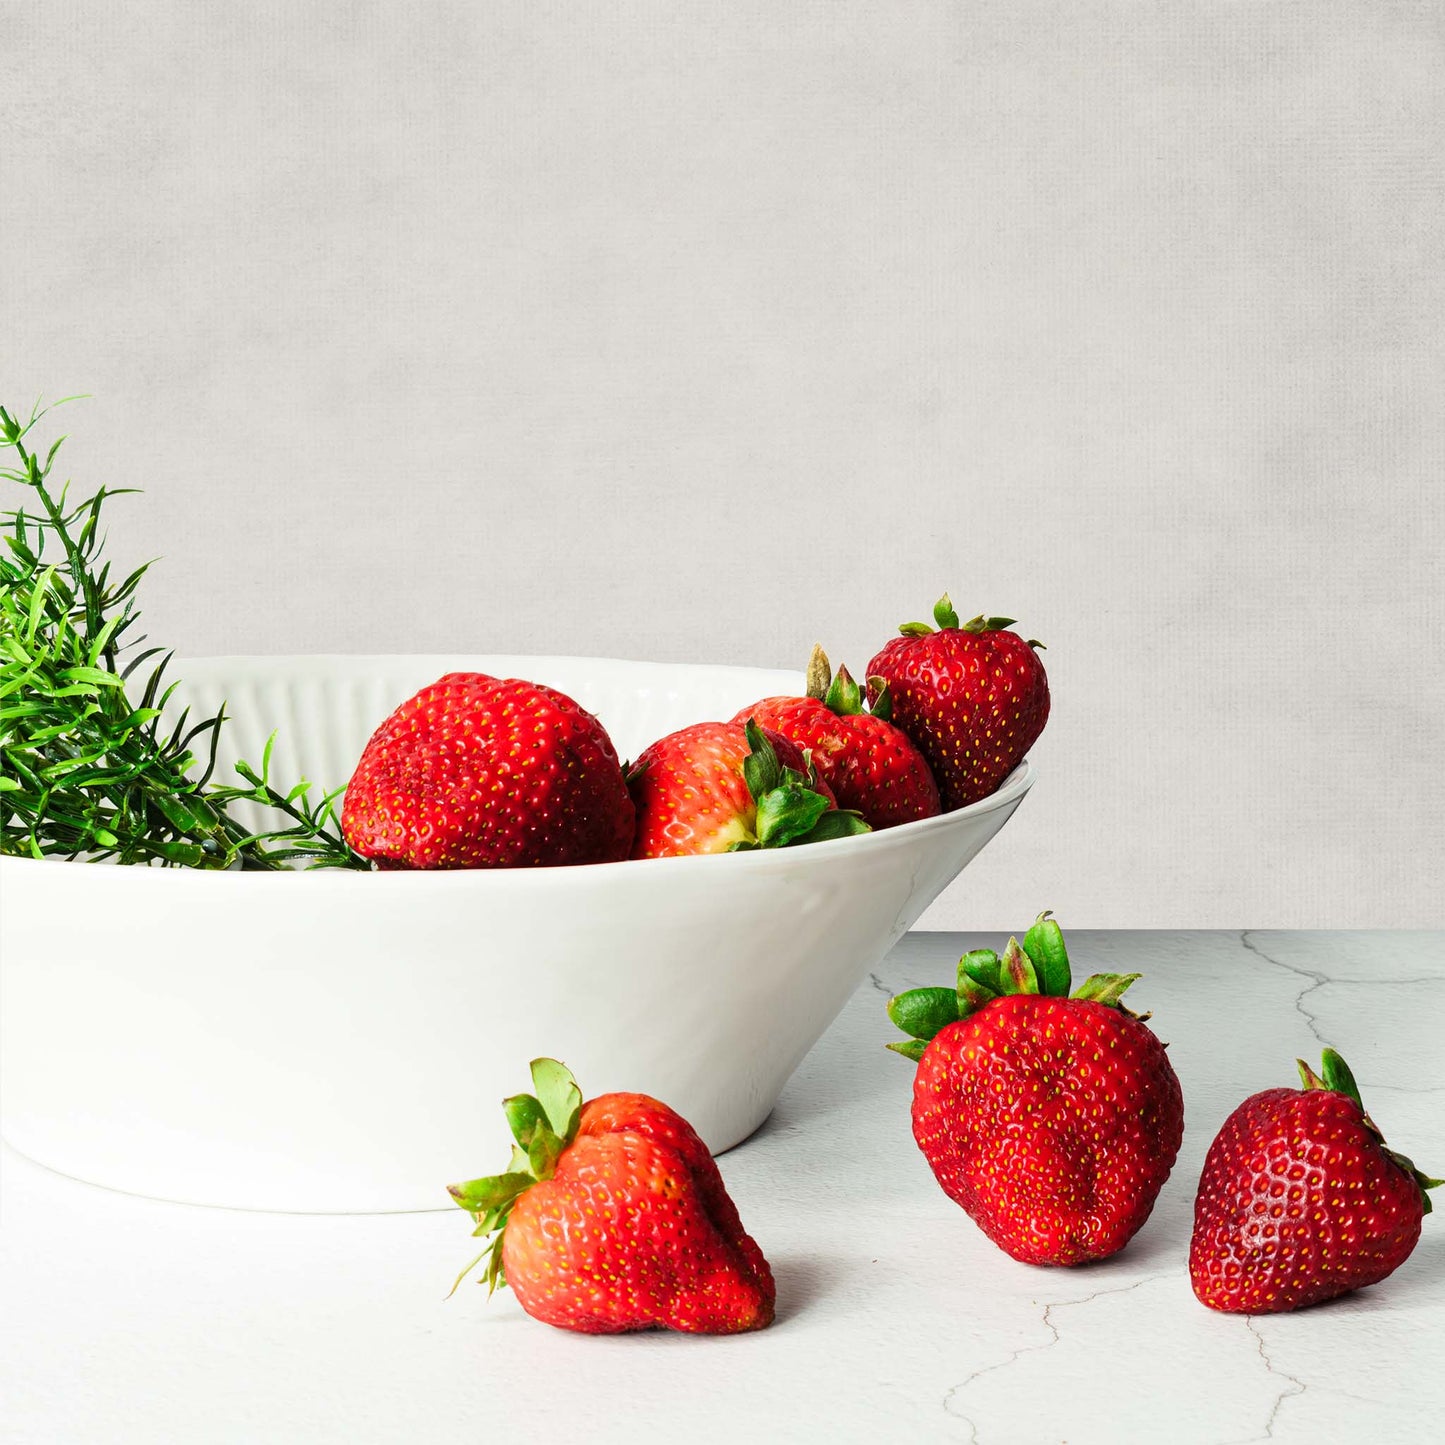 Artesa ceramic bowl filled with strawberries and rosemary on limestone table.